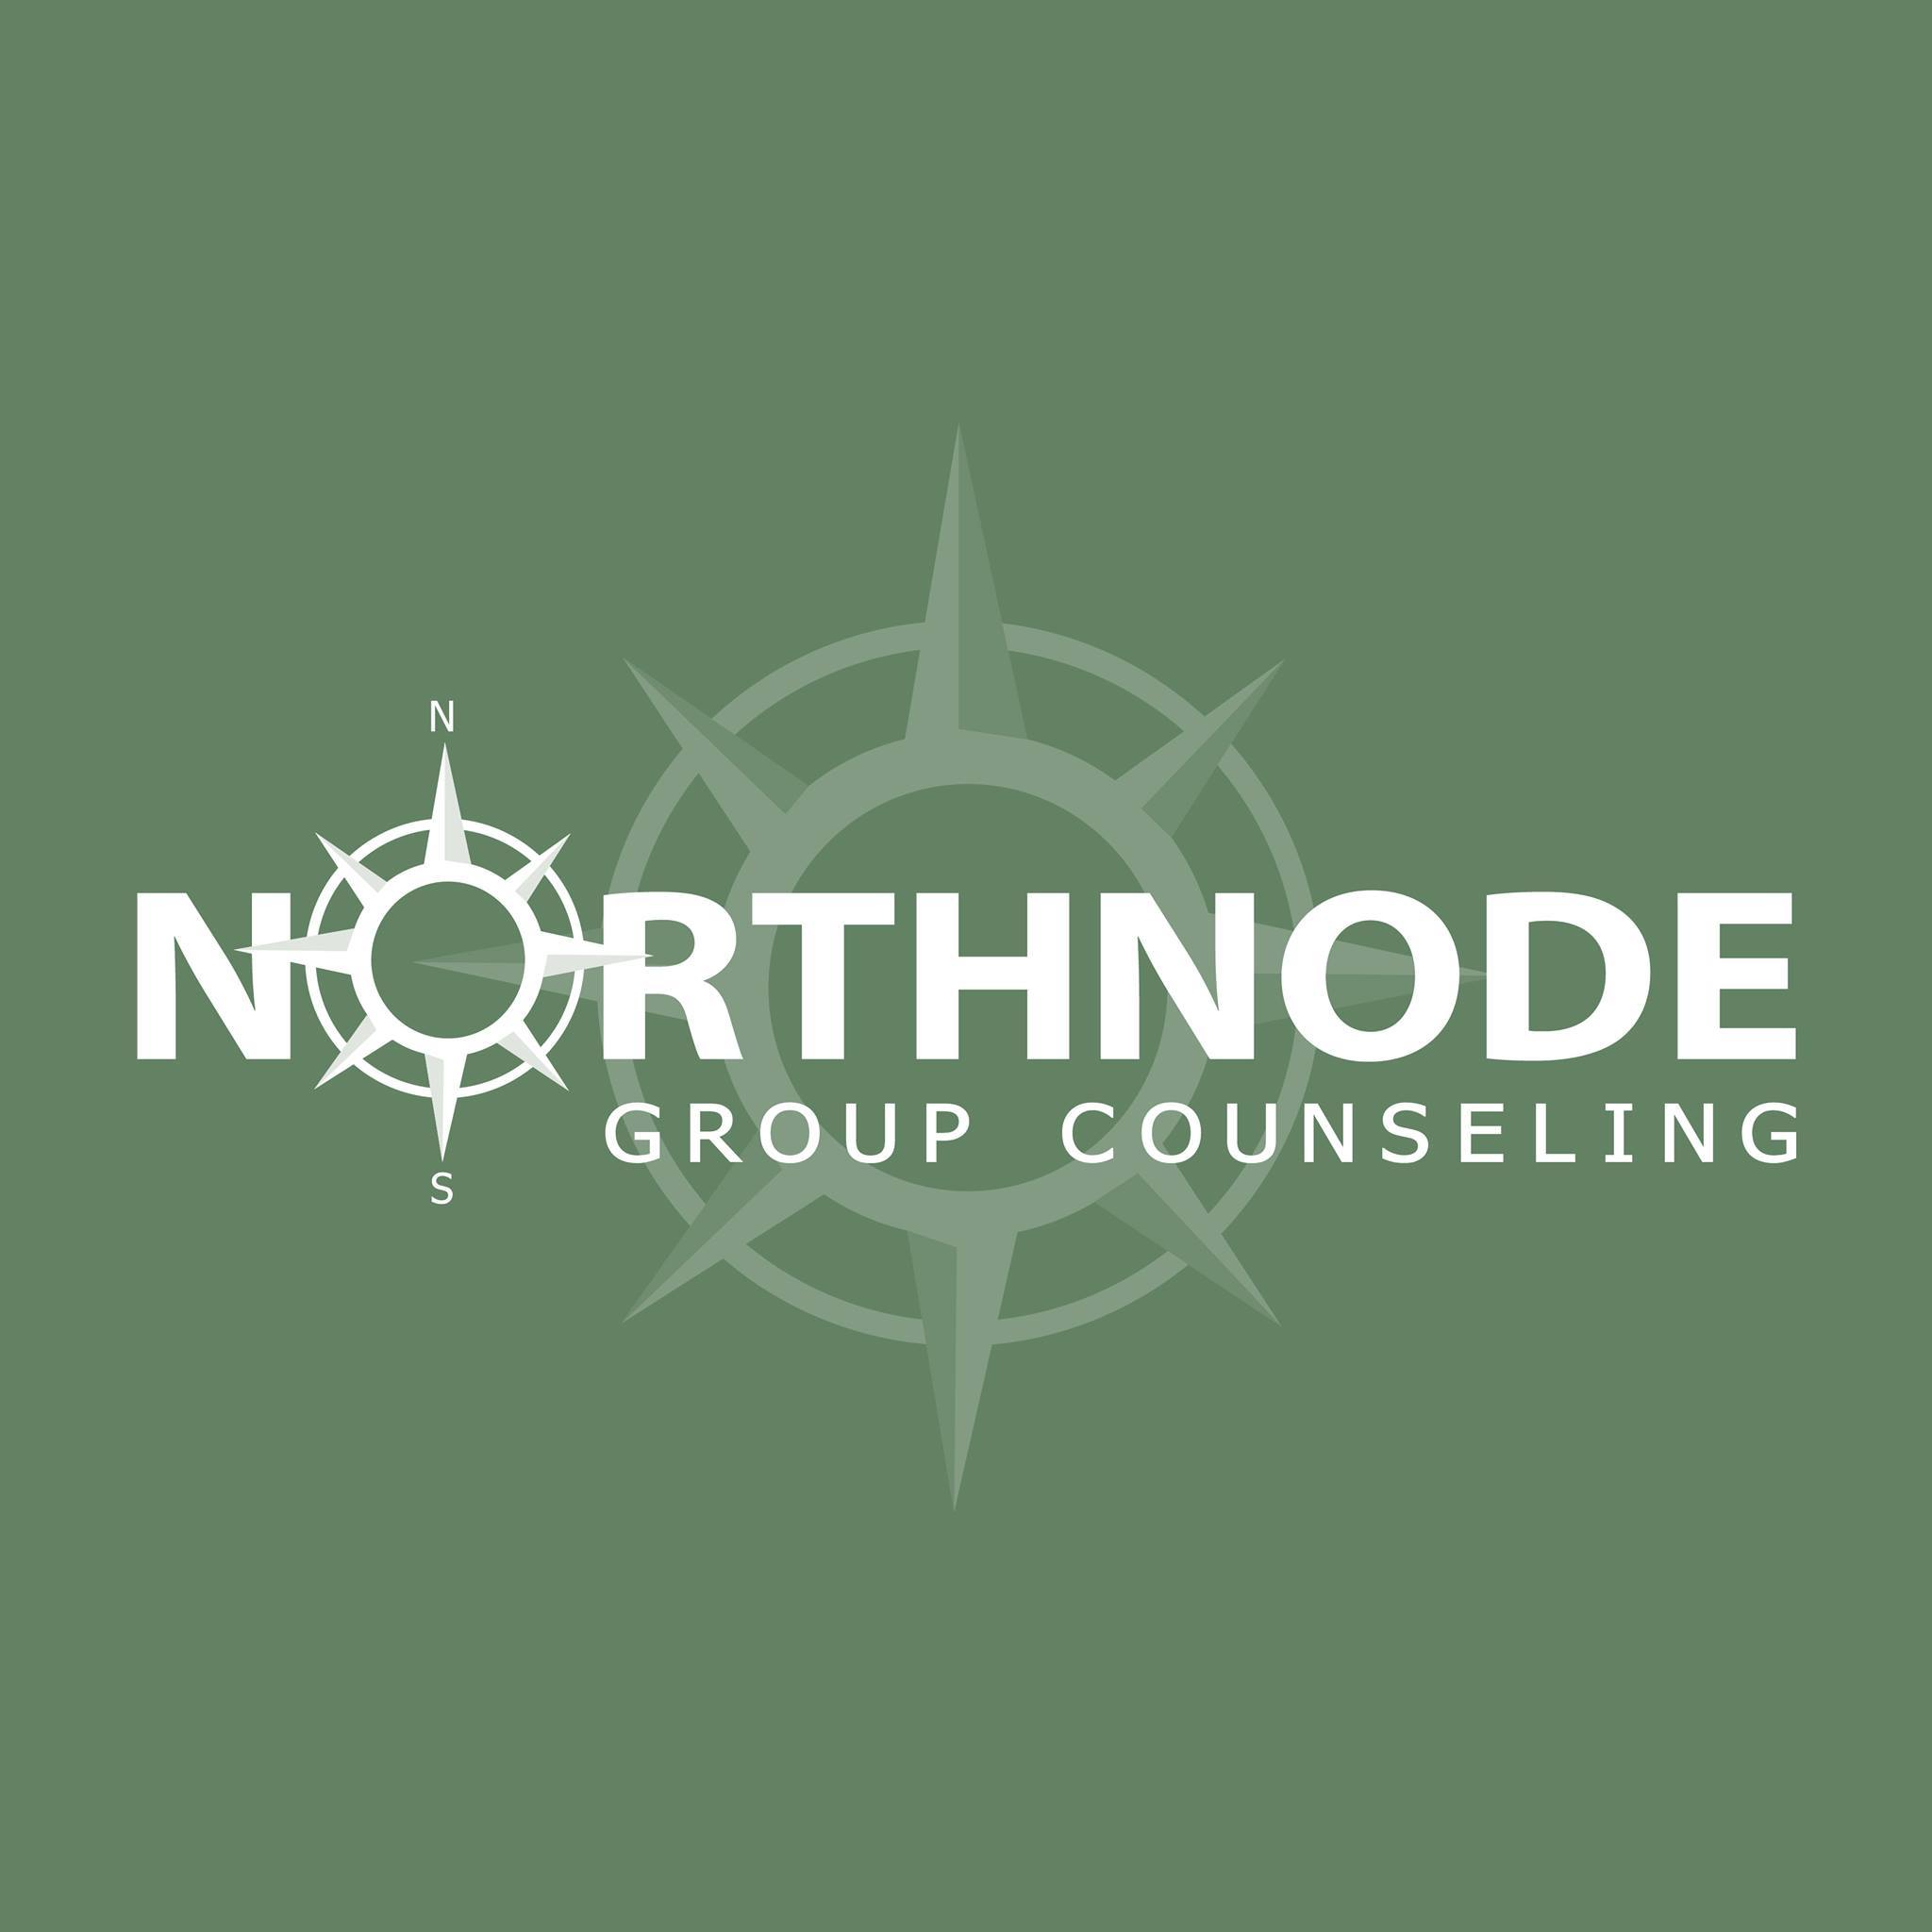 NorthNode Group Counseling